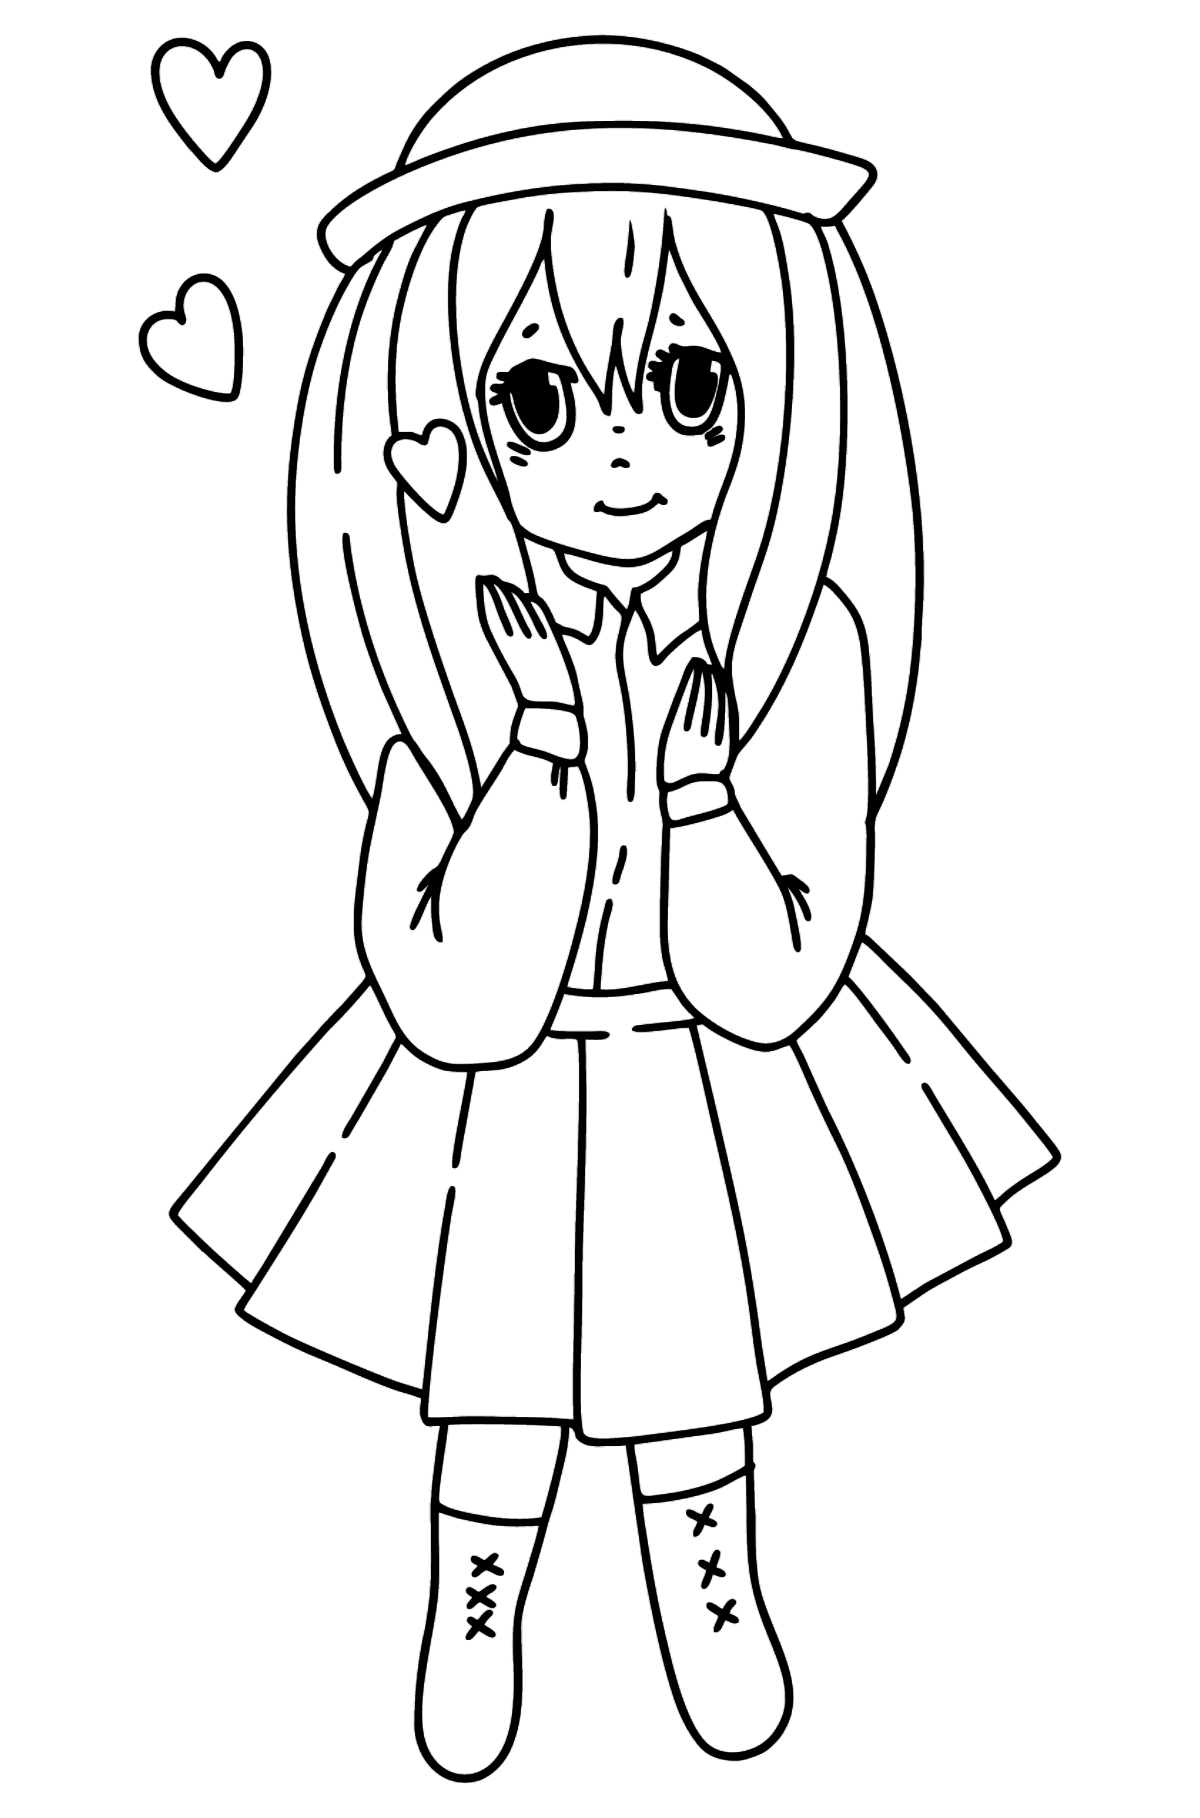 Anime girl in love coloring page - Coloring Pages for Kids